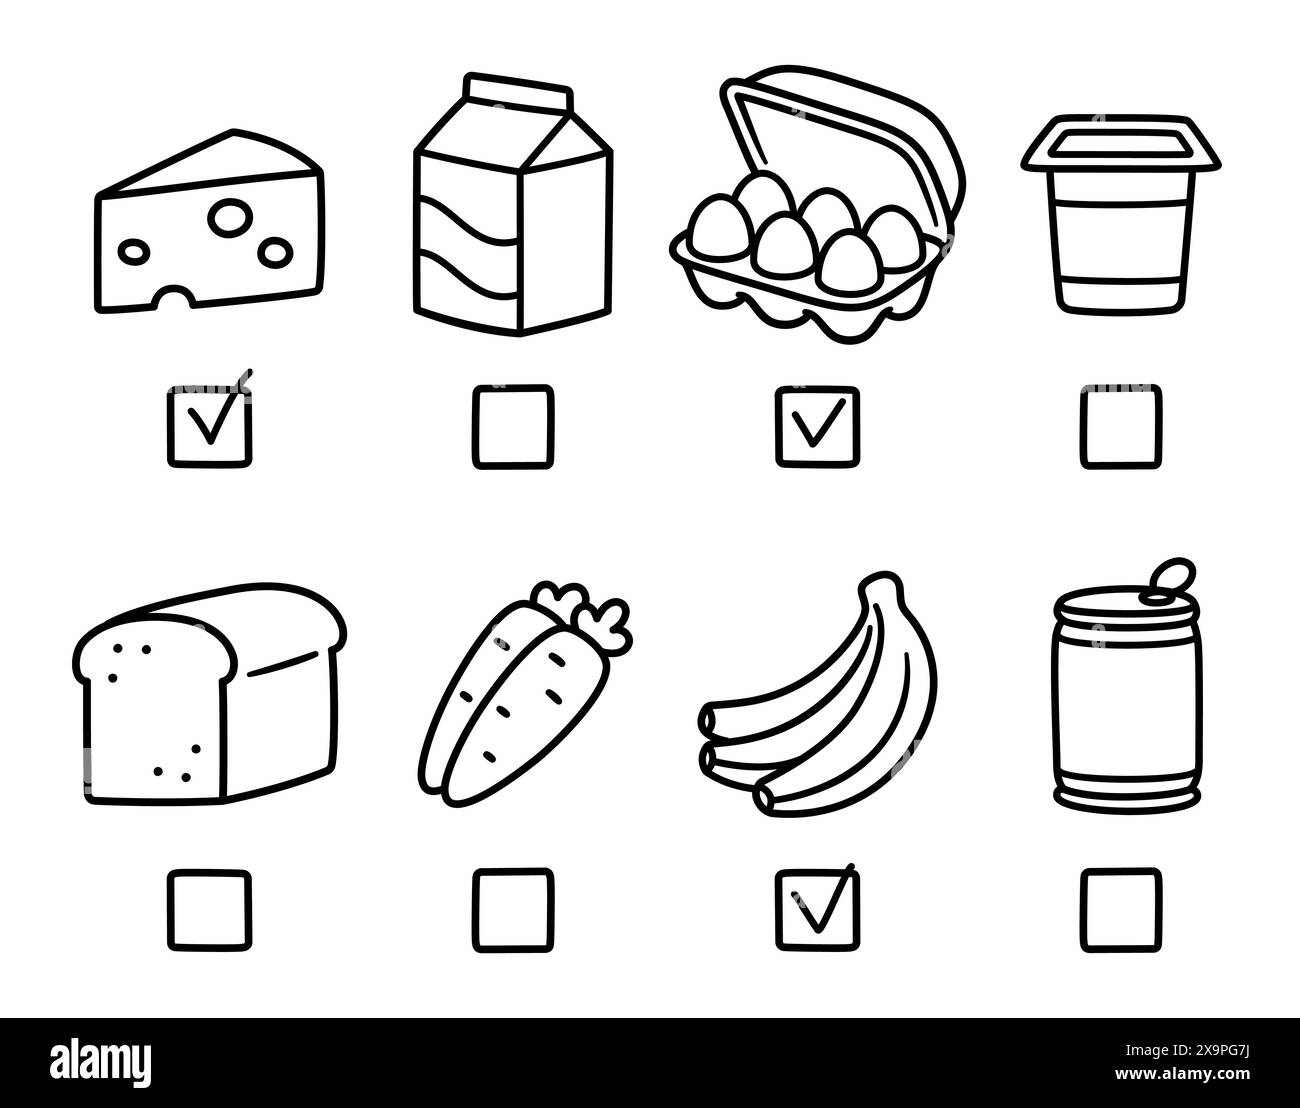 Grocery shopping list doodles. Bread, milk, eggs and cheese, bananas and other popular grocery items. Simple cartoon drawing, vector clip art illustra Stock Vector